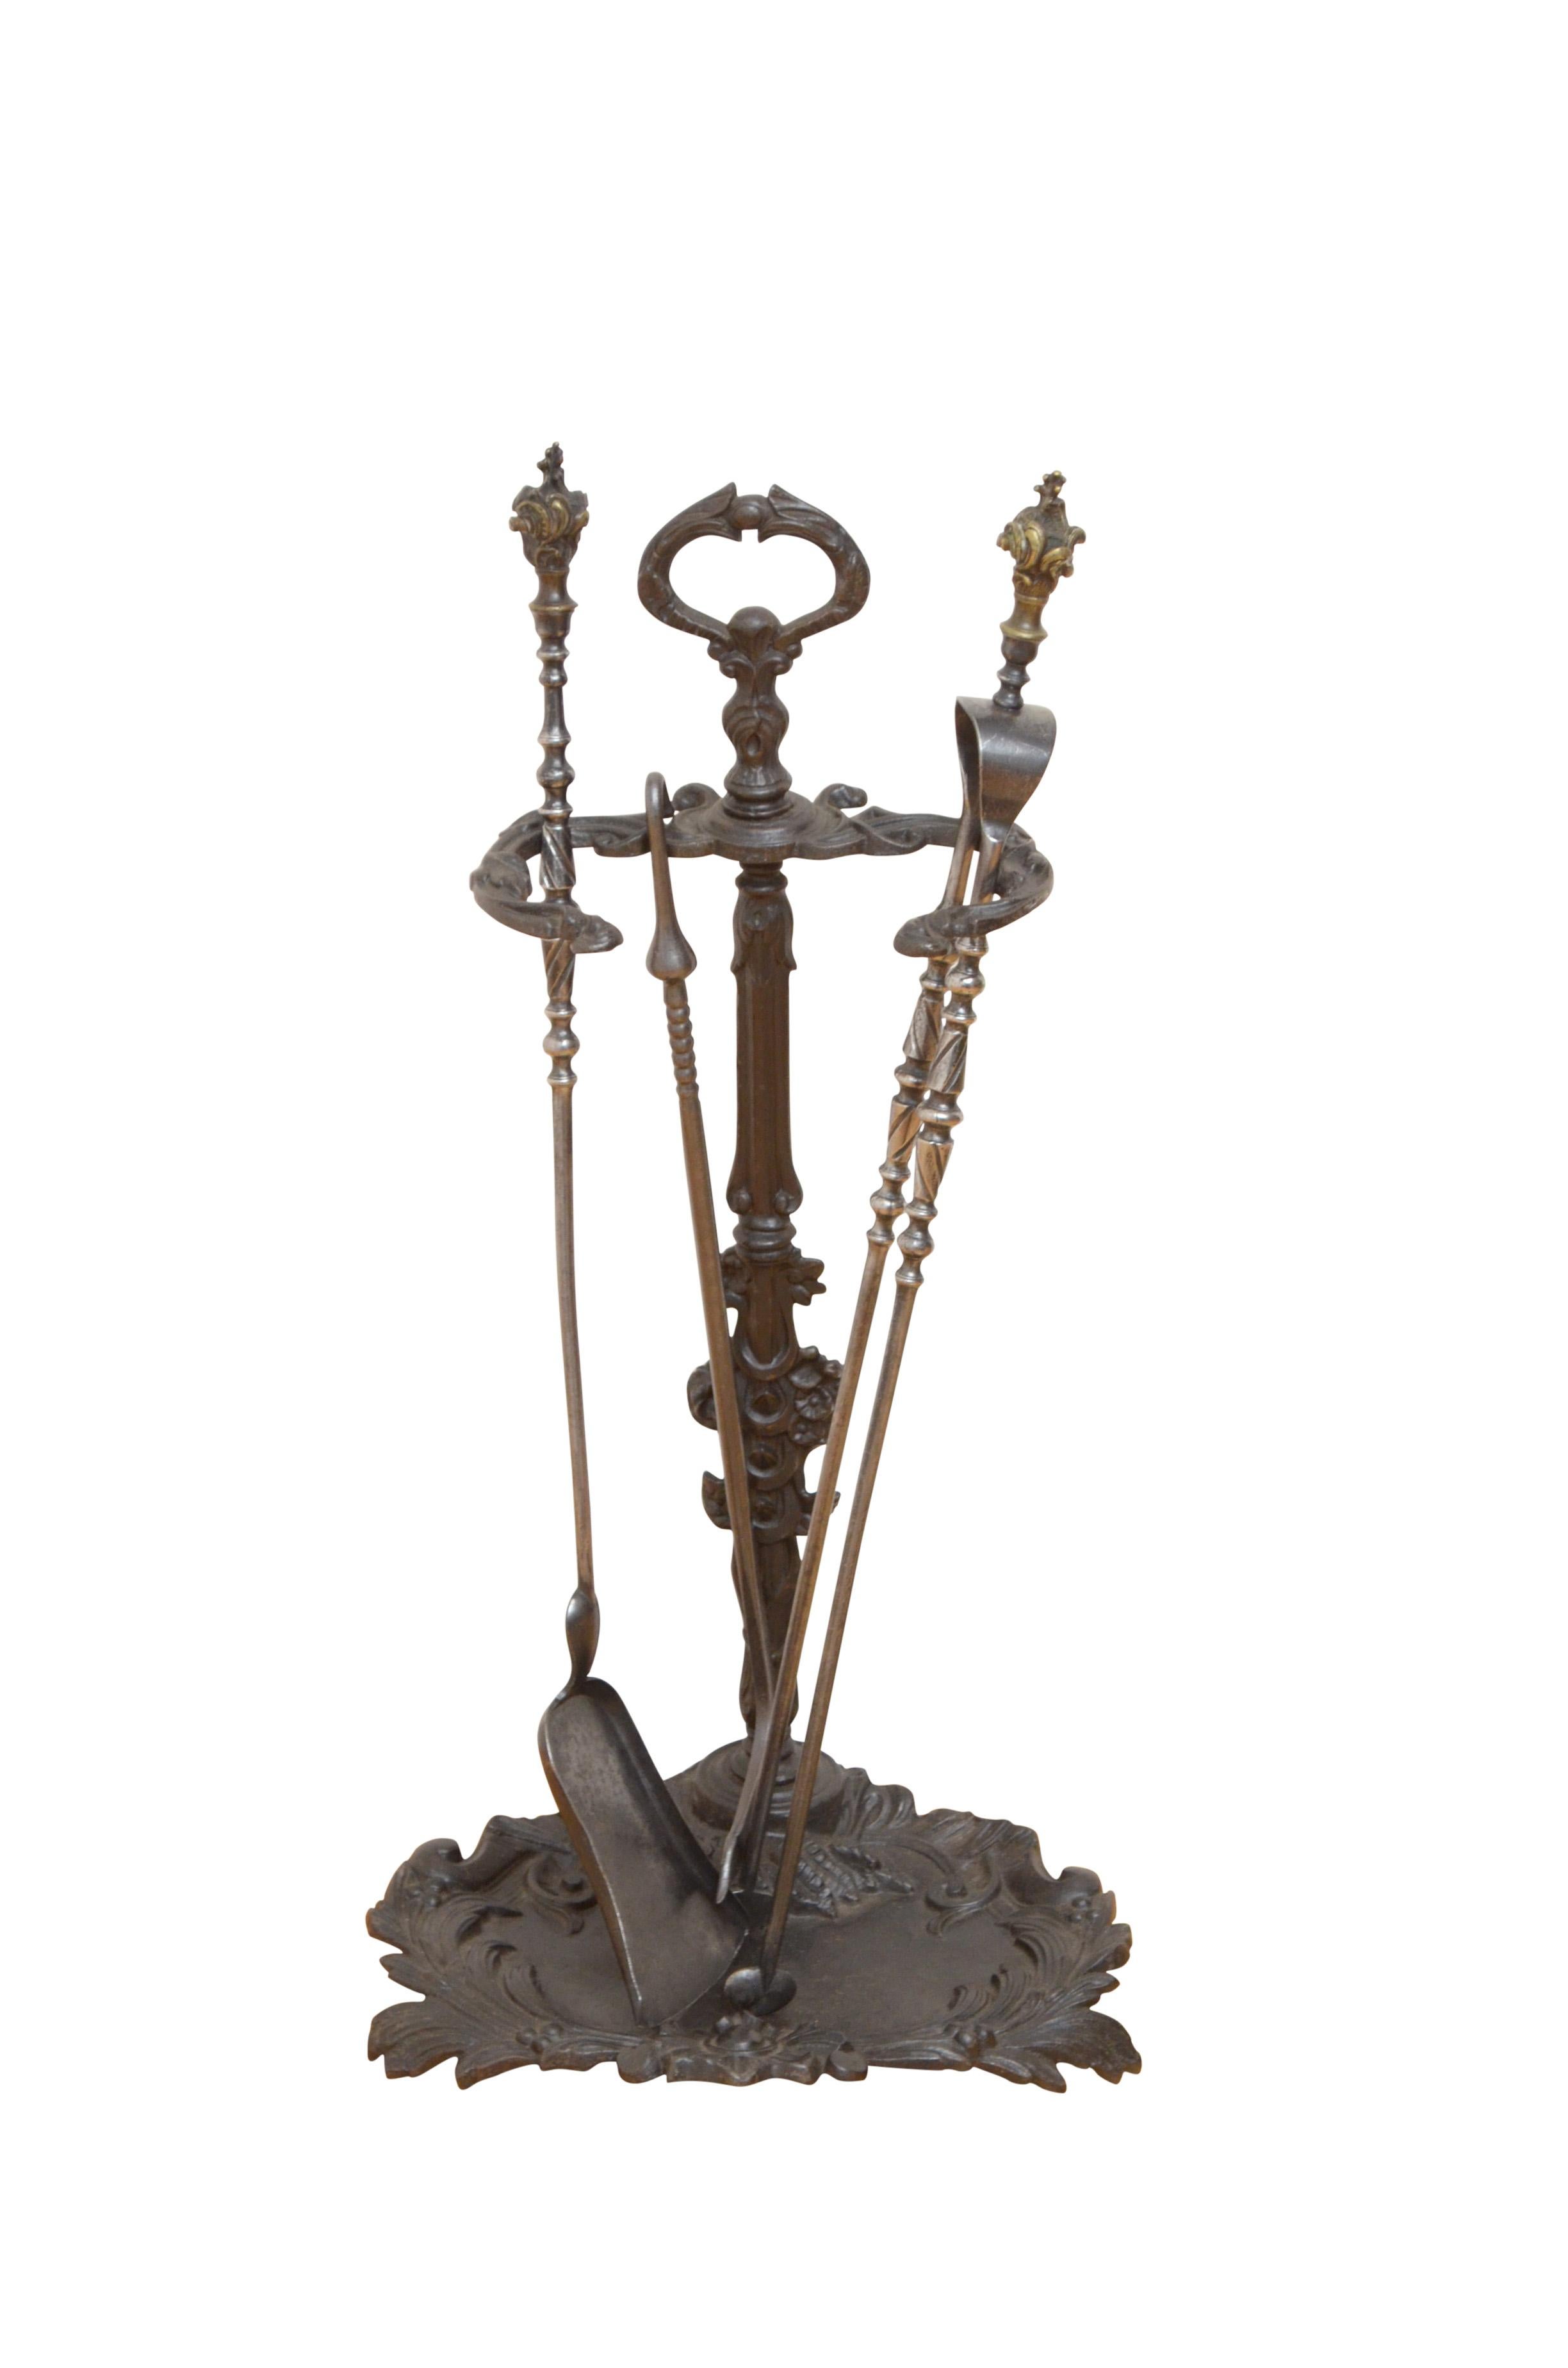 k0069 stylish Art Nouveau cast iron umbrella stand or walking stick stand in excellent home ready condition. This antique can be used as fire iron stand, circa 1890
Measures: H 25.5